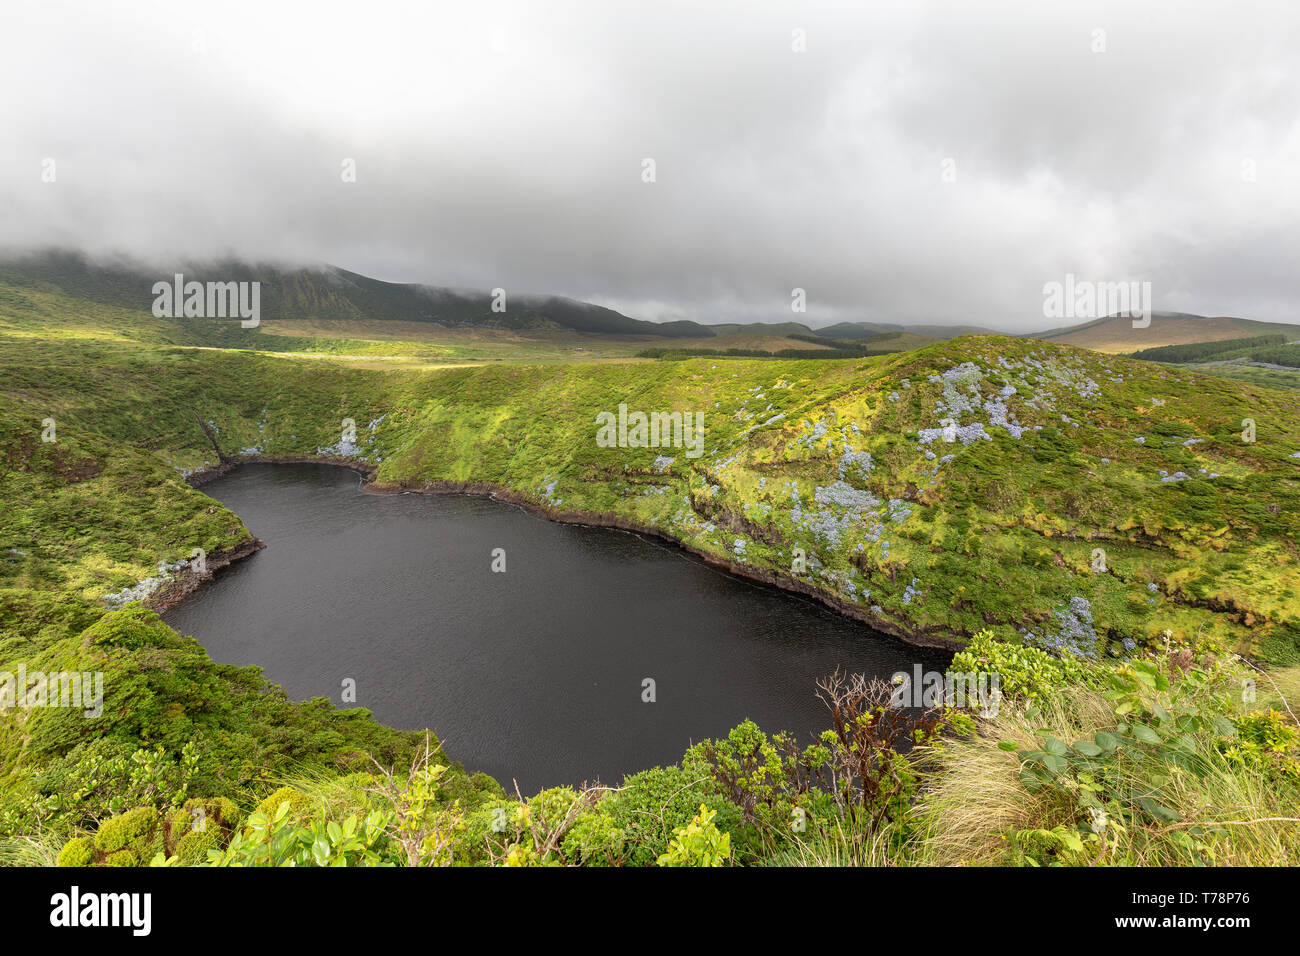 The dark crater lake, Lagoa Comprida on the island of Flores in the Azores. Stock Photo